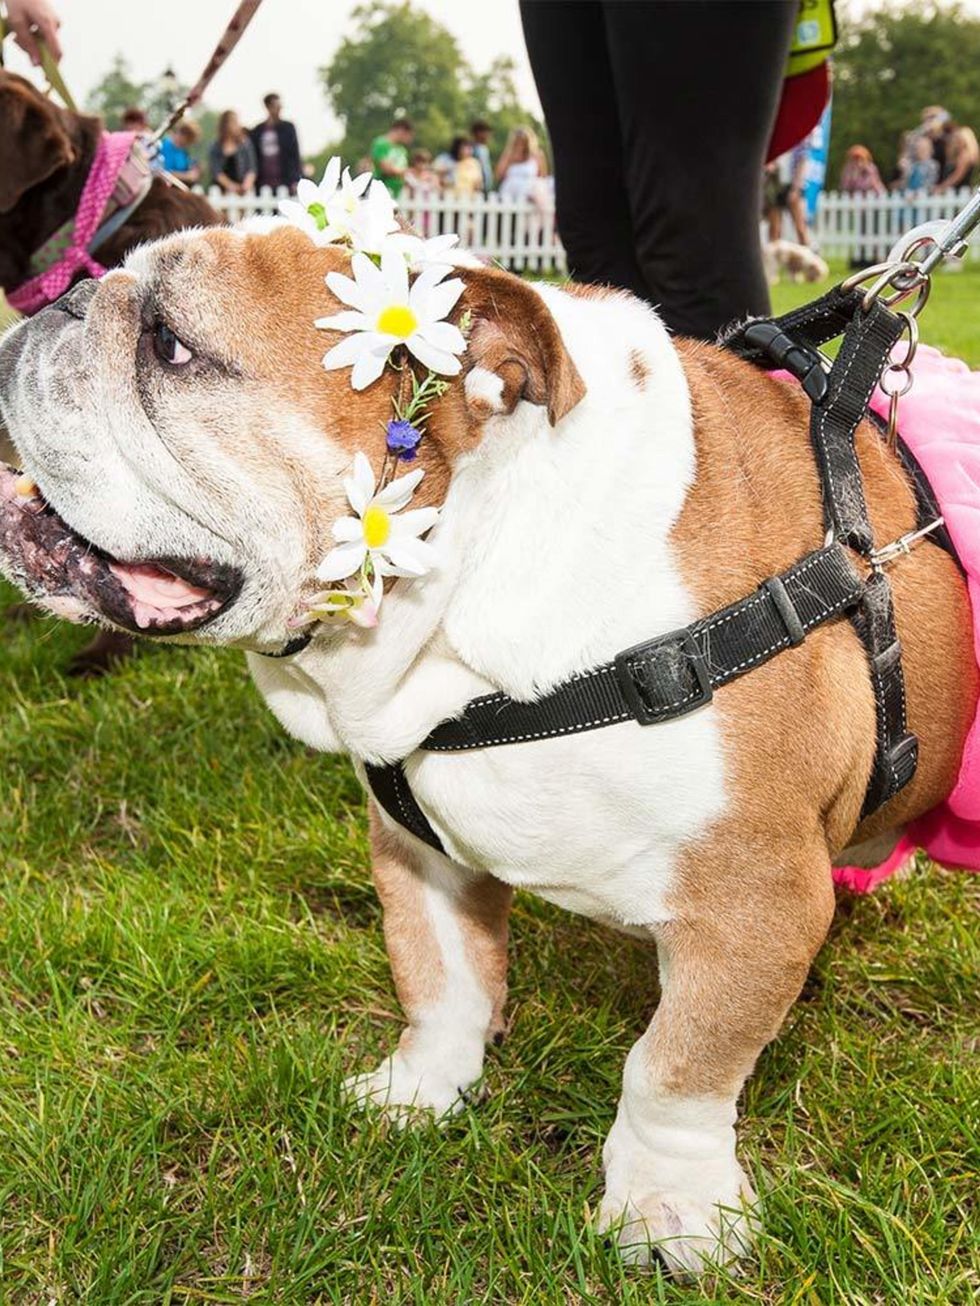 <p>EVENT: Pupaid</p>

<p>Dog shows just got stylish. That's right - forget crusty Crufts, because there's a way more fashionable (and fun) canine pageant in town. Held at London's Primrose Hill, this open-to-all charity event features categories including